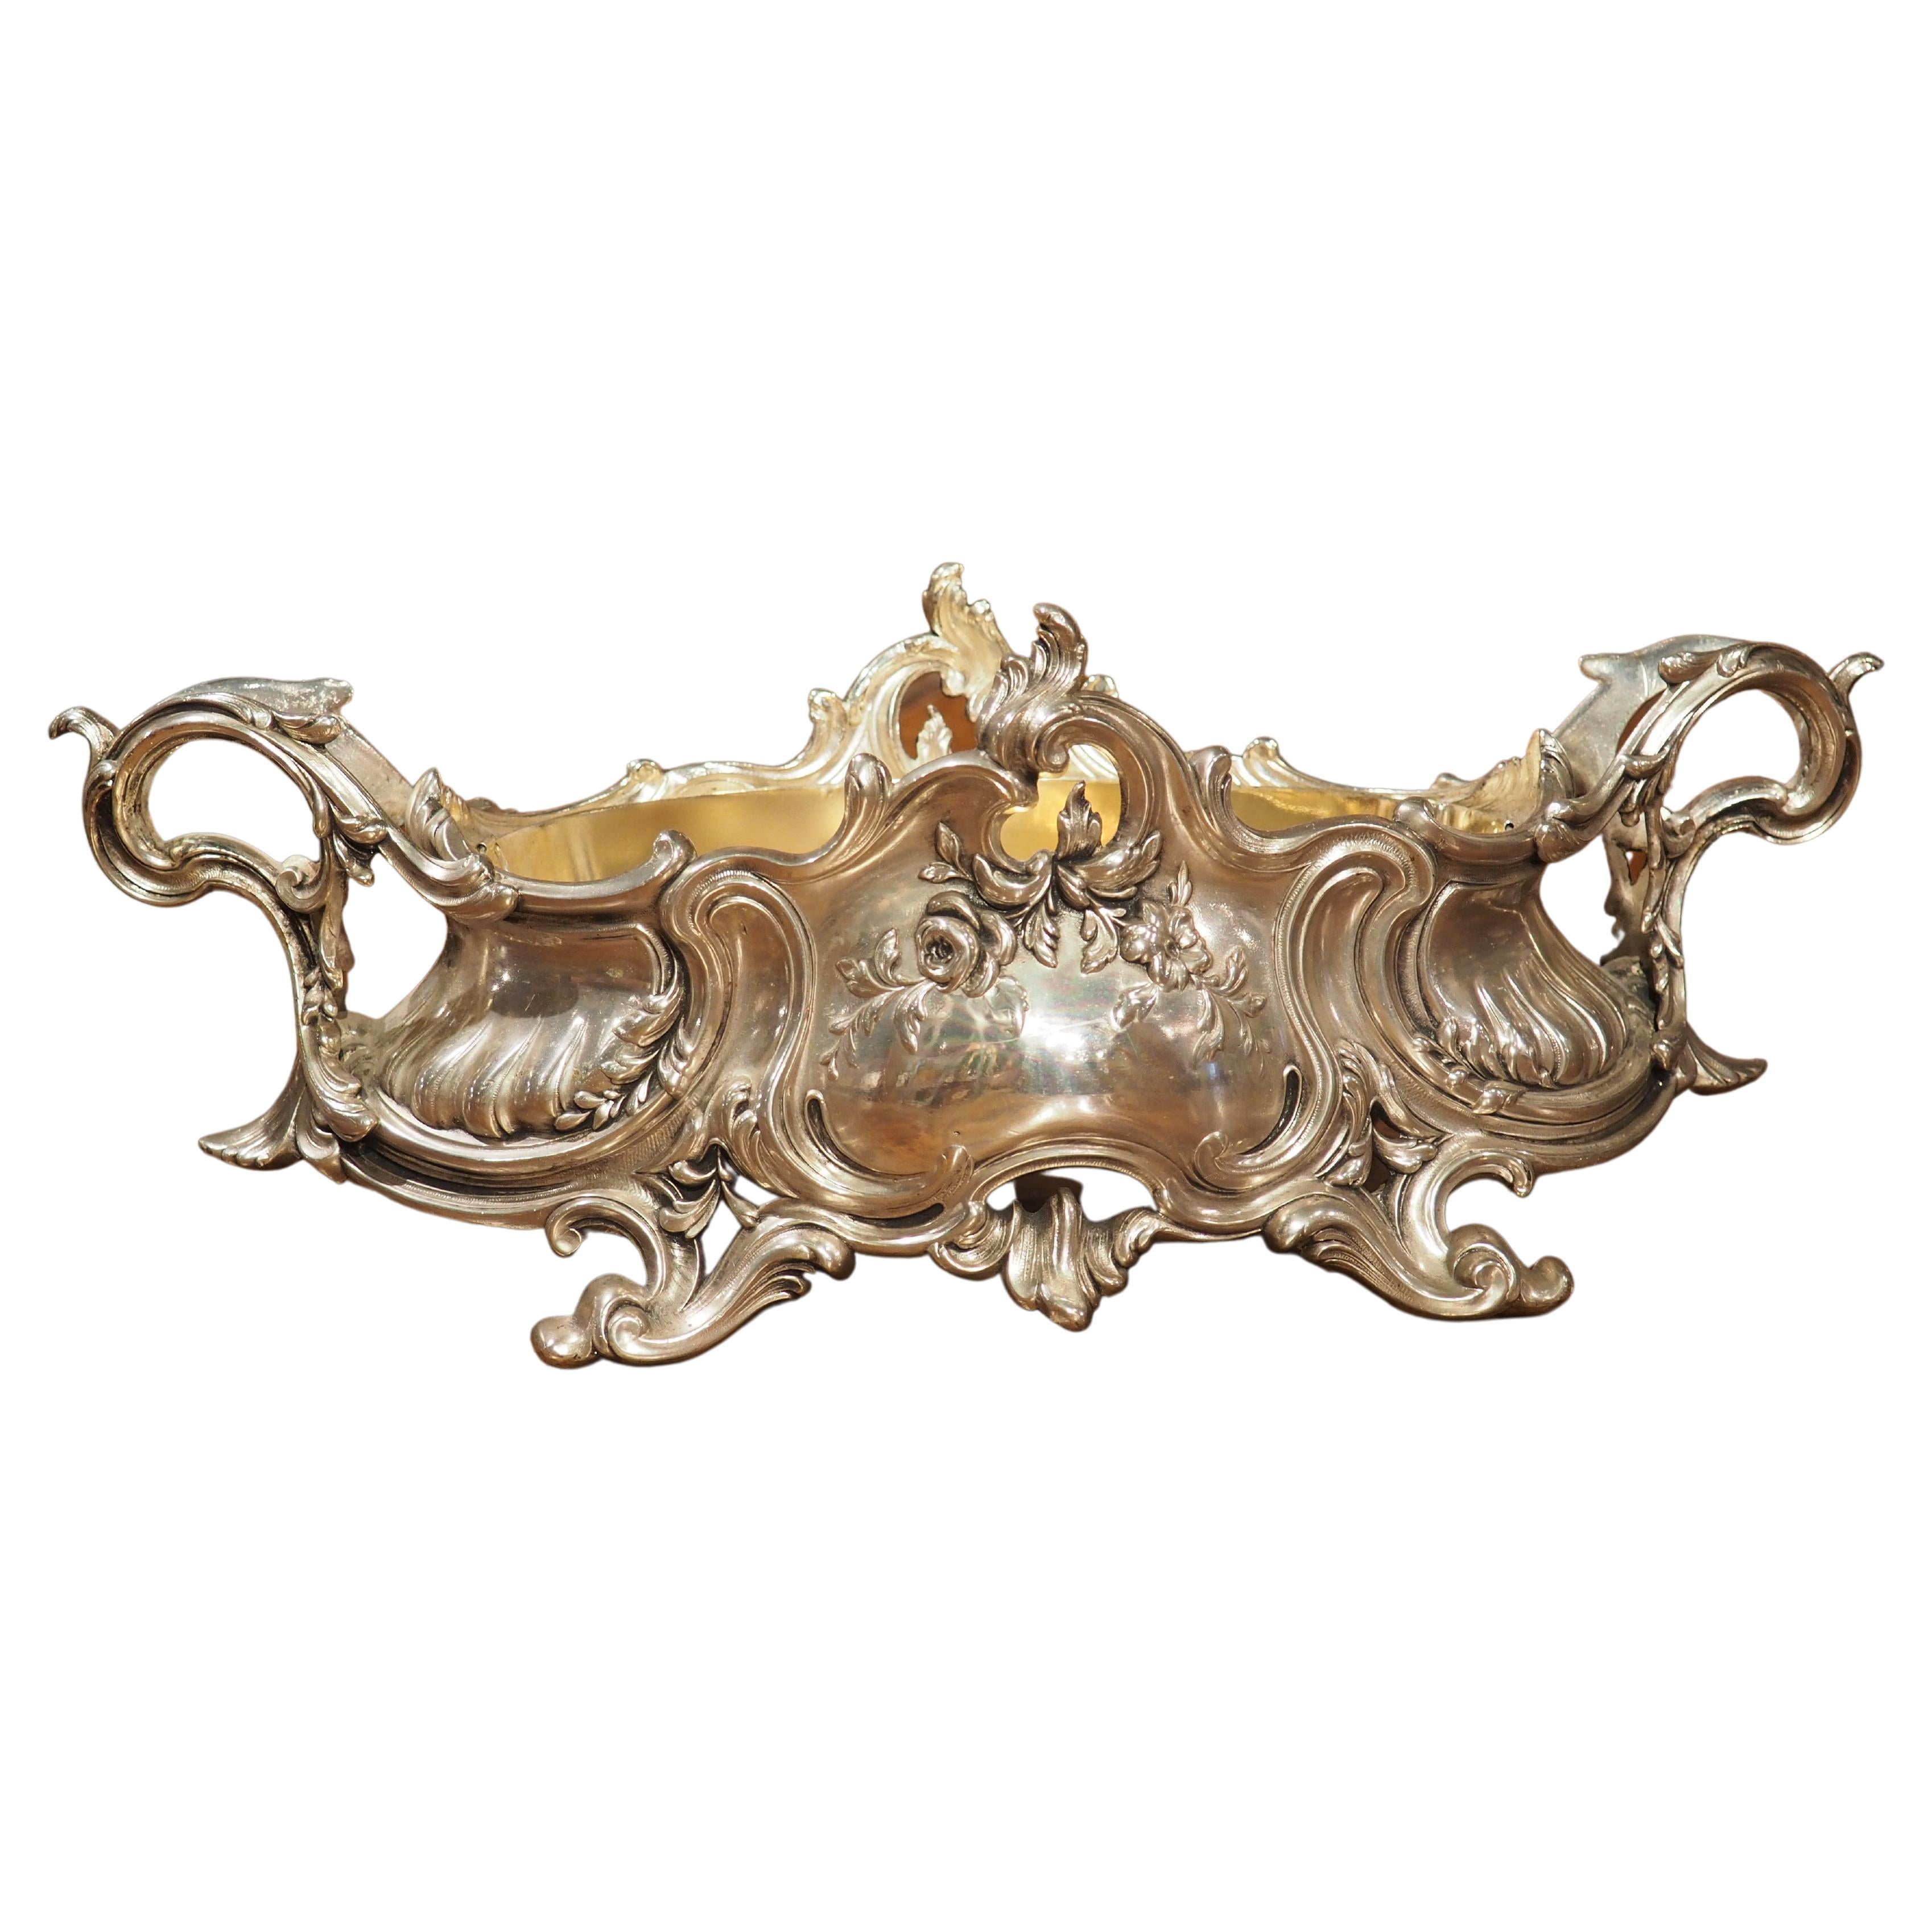 Silver Plated Solid Bronze Louis XV Style Jardiniere with Liner, Circa 1890